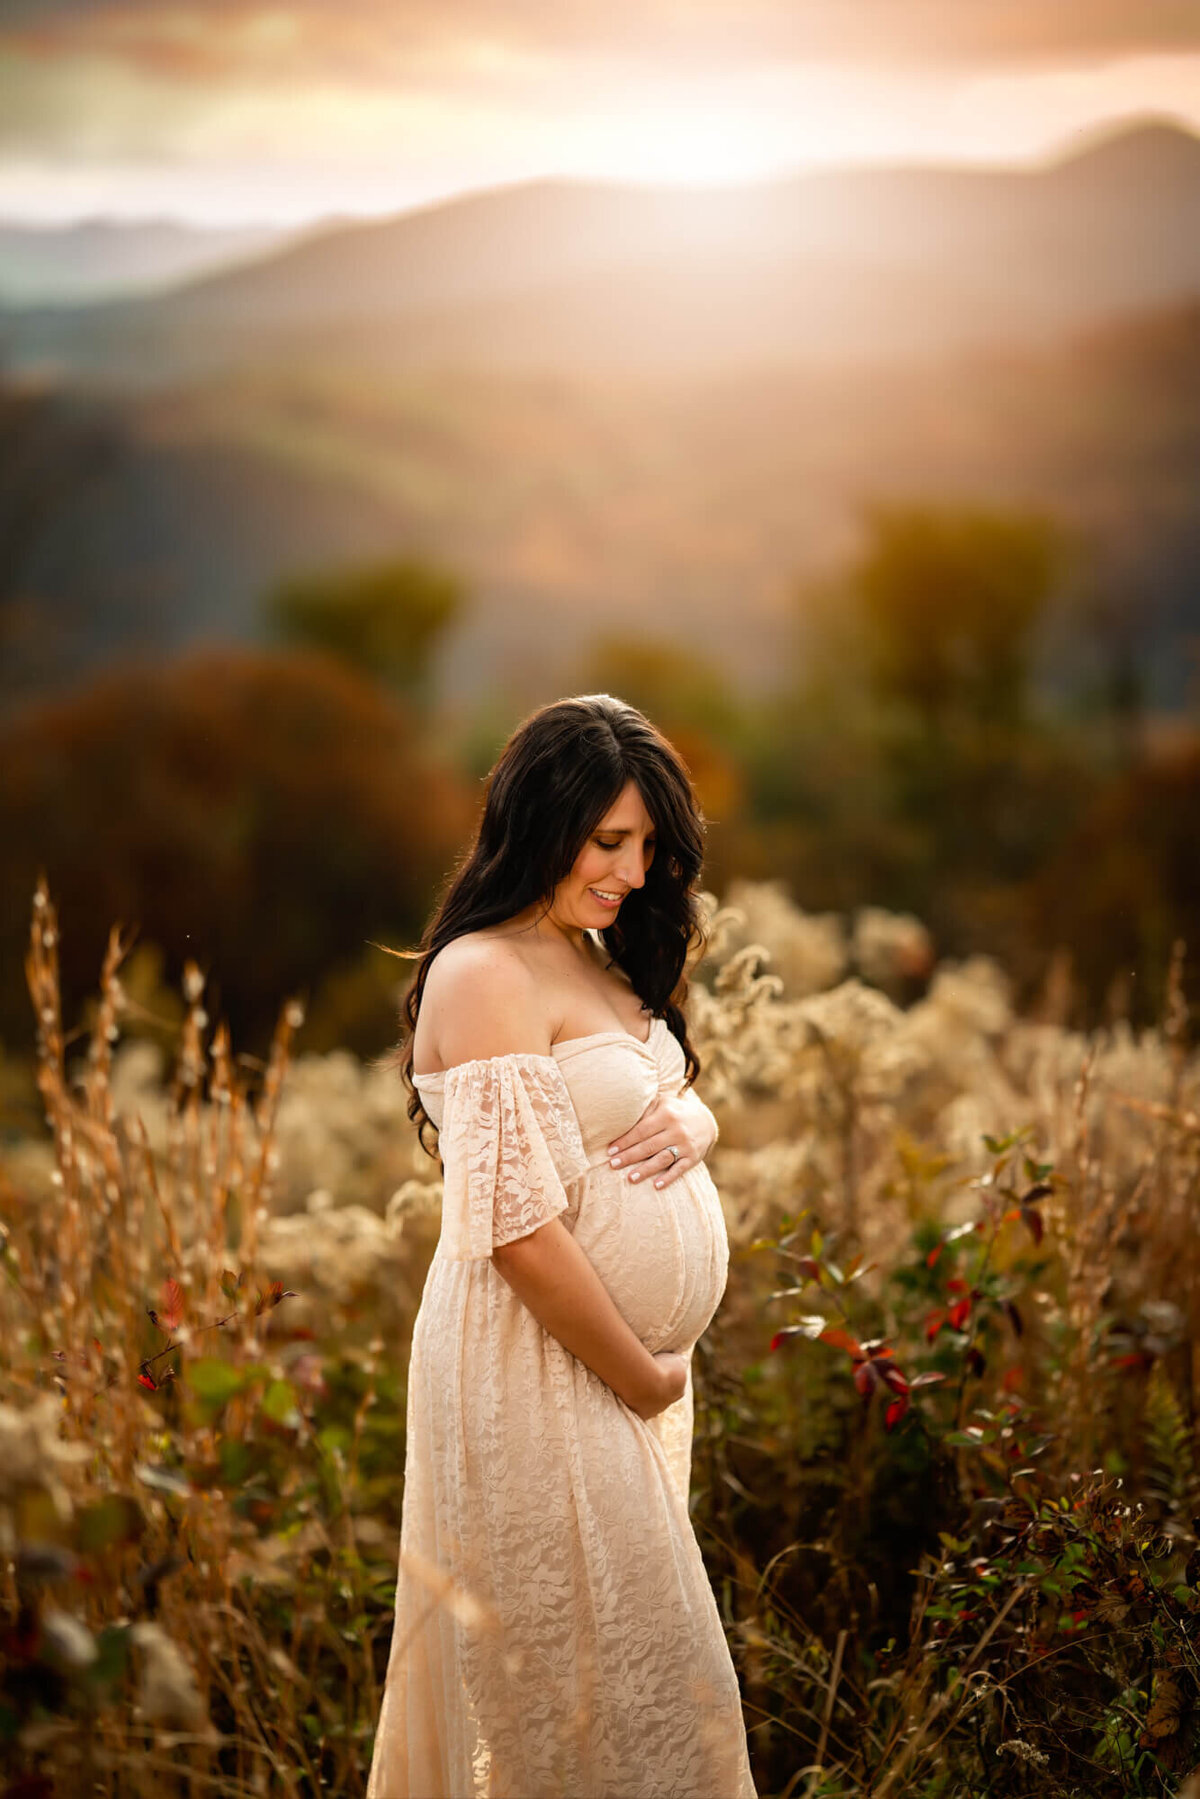 A dark haired mama to be in a long cream dress cradles her baby bump